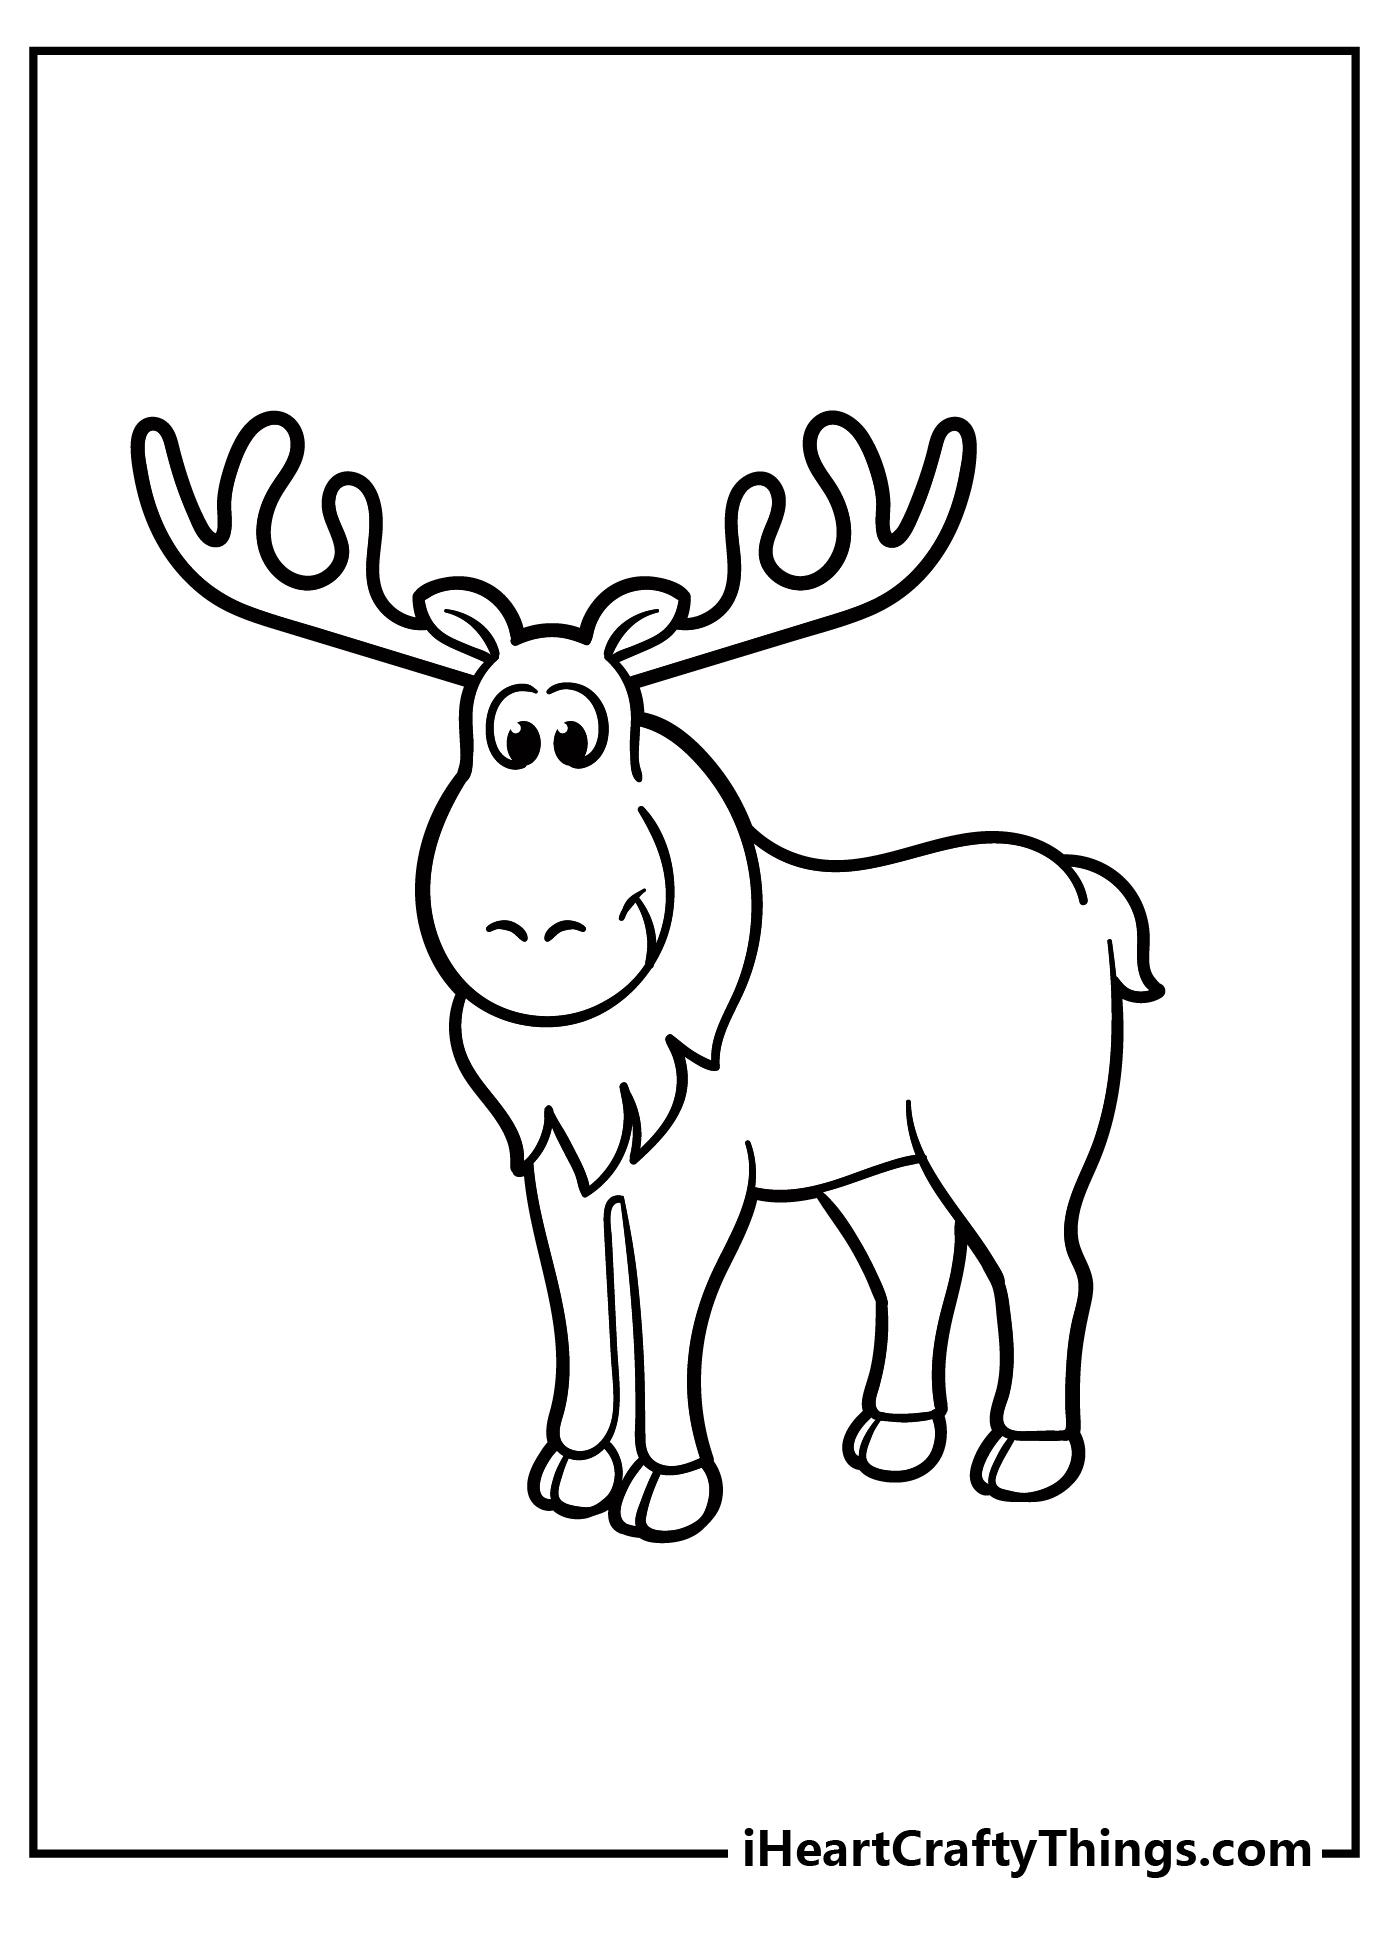 Moose Coloring Pages for kids free download